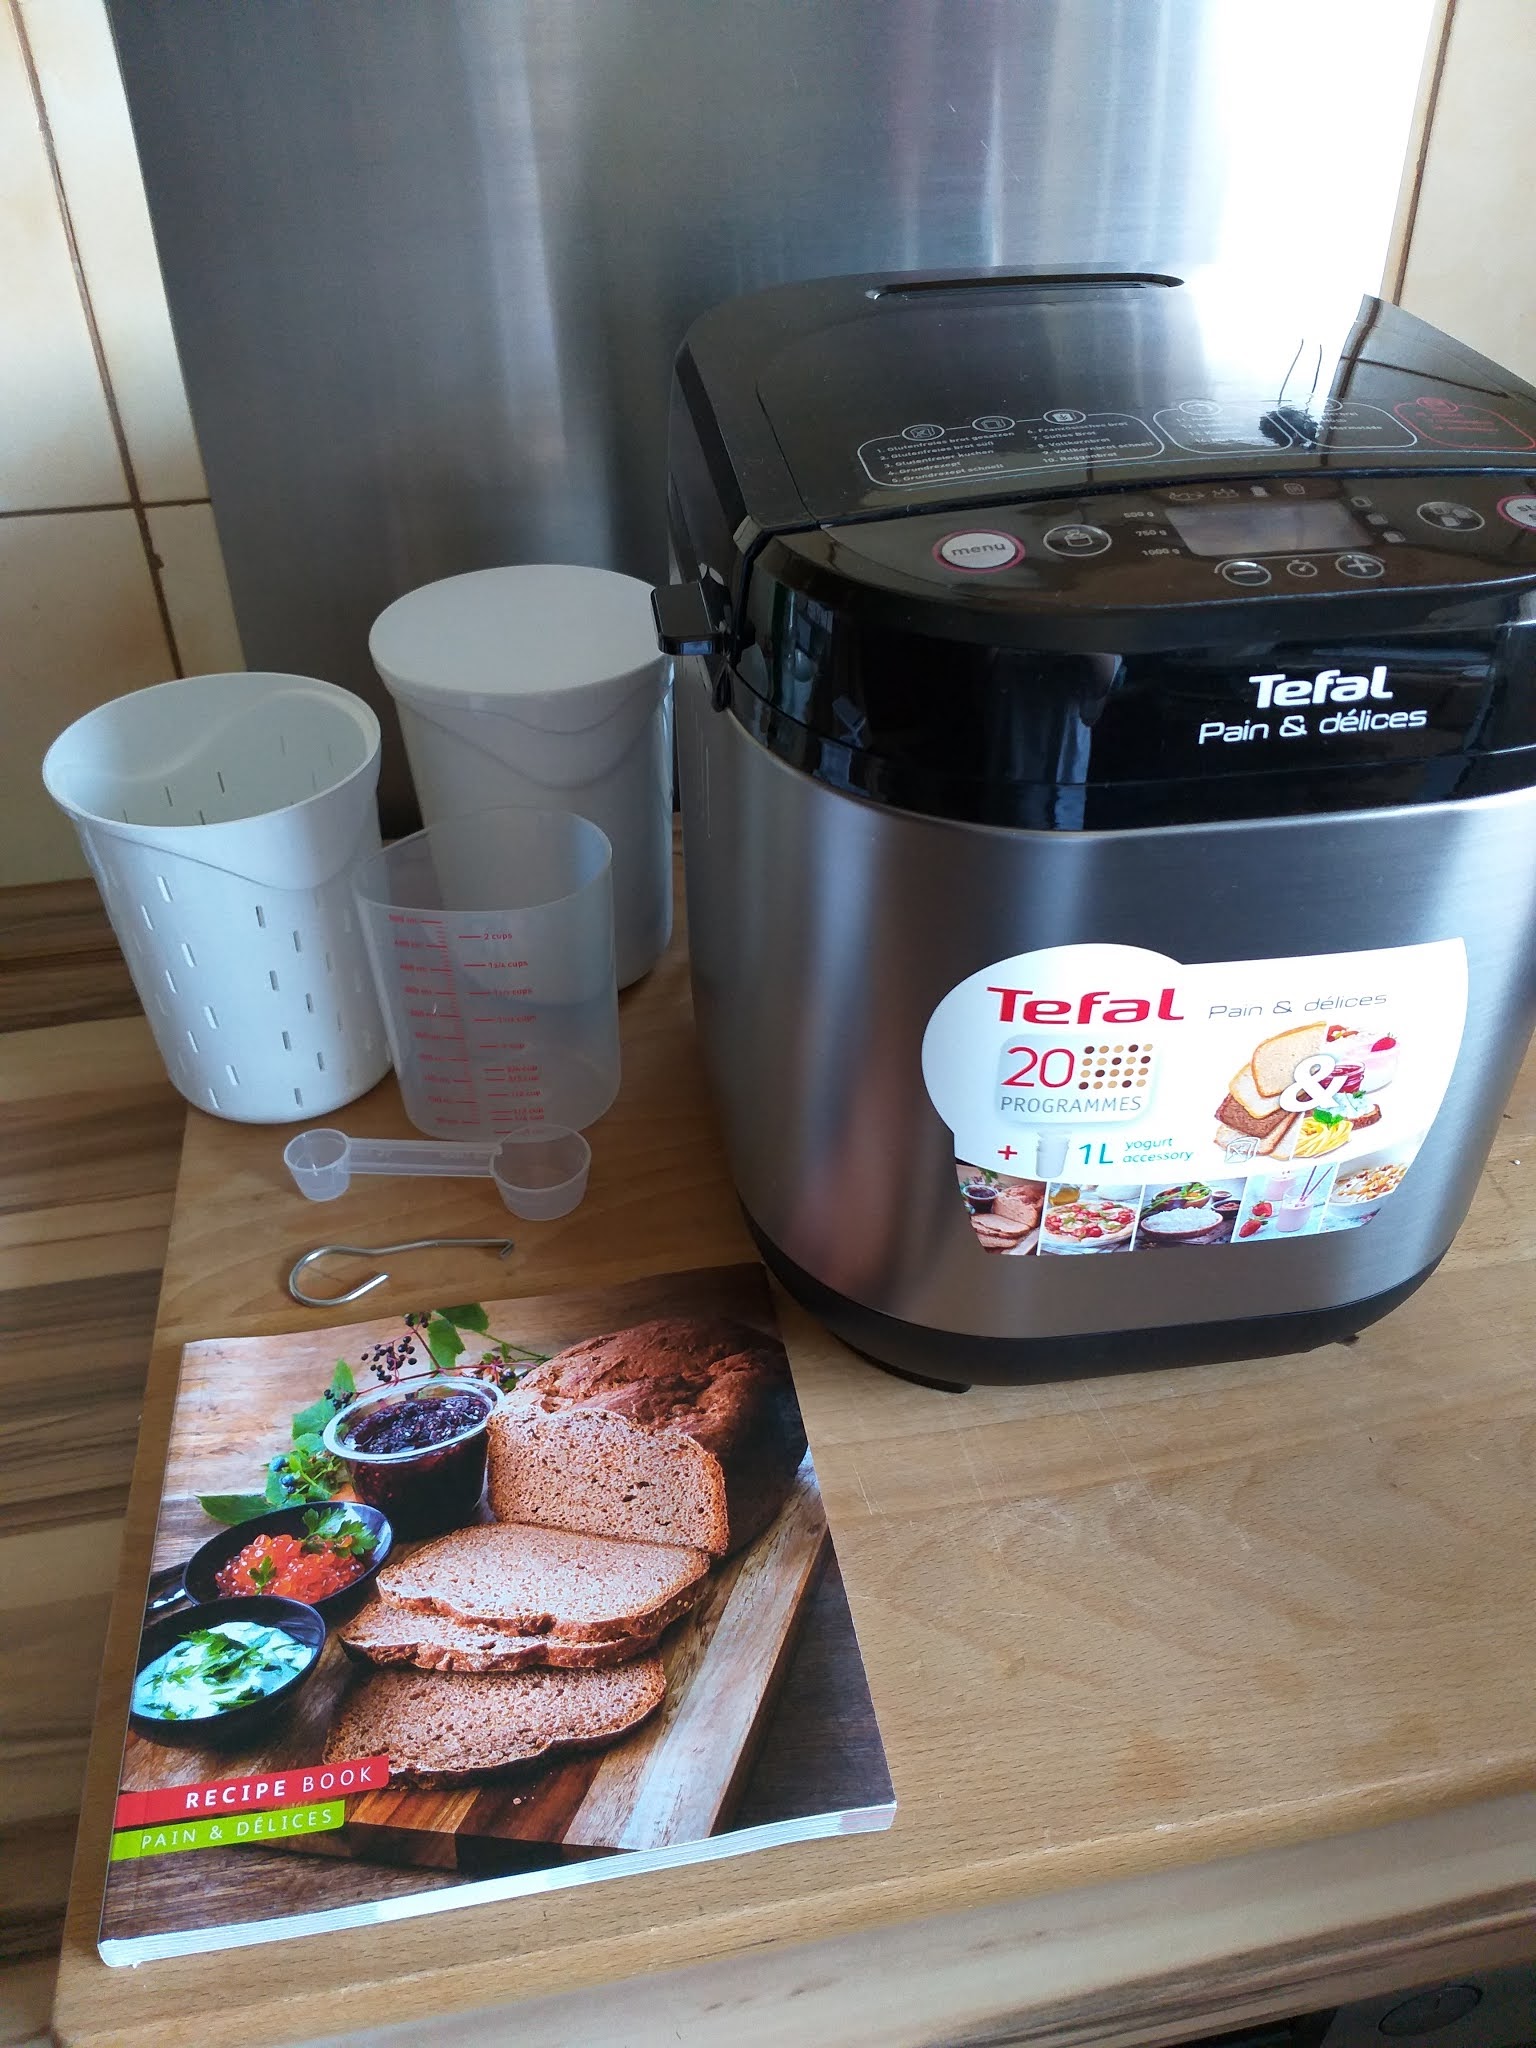 Julani - time to test: & DELICES PAIN TEFAL BROTBACKAUTOMAT